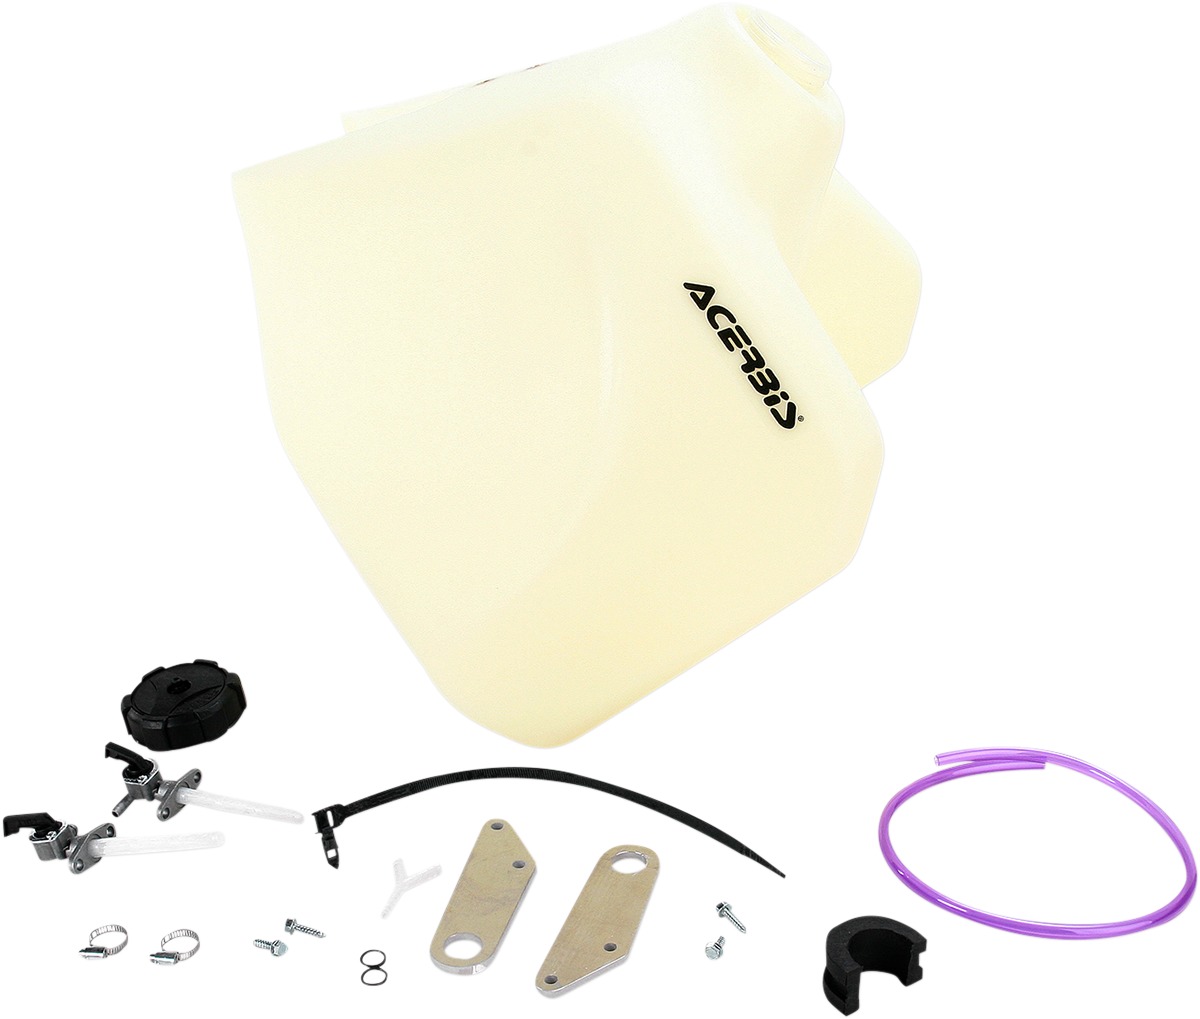 Large Capacity Fuel Tank Natural 5.8 gal - 96-04 XR250R XR400R - Click Image to Close